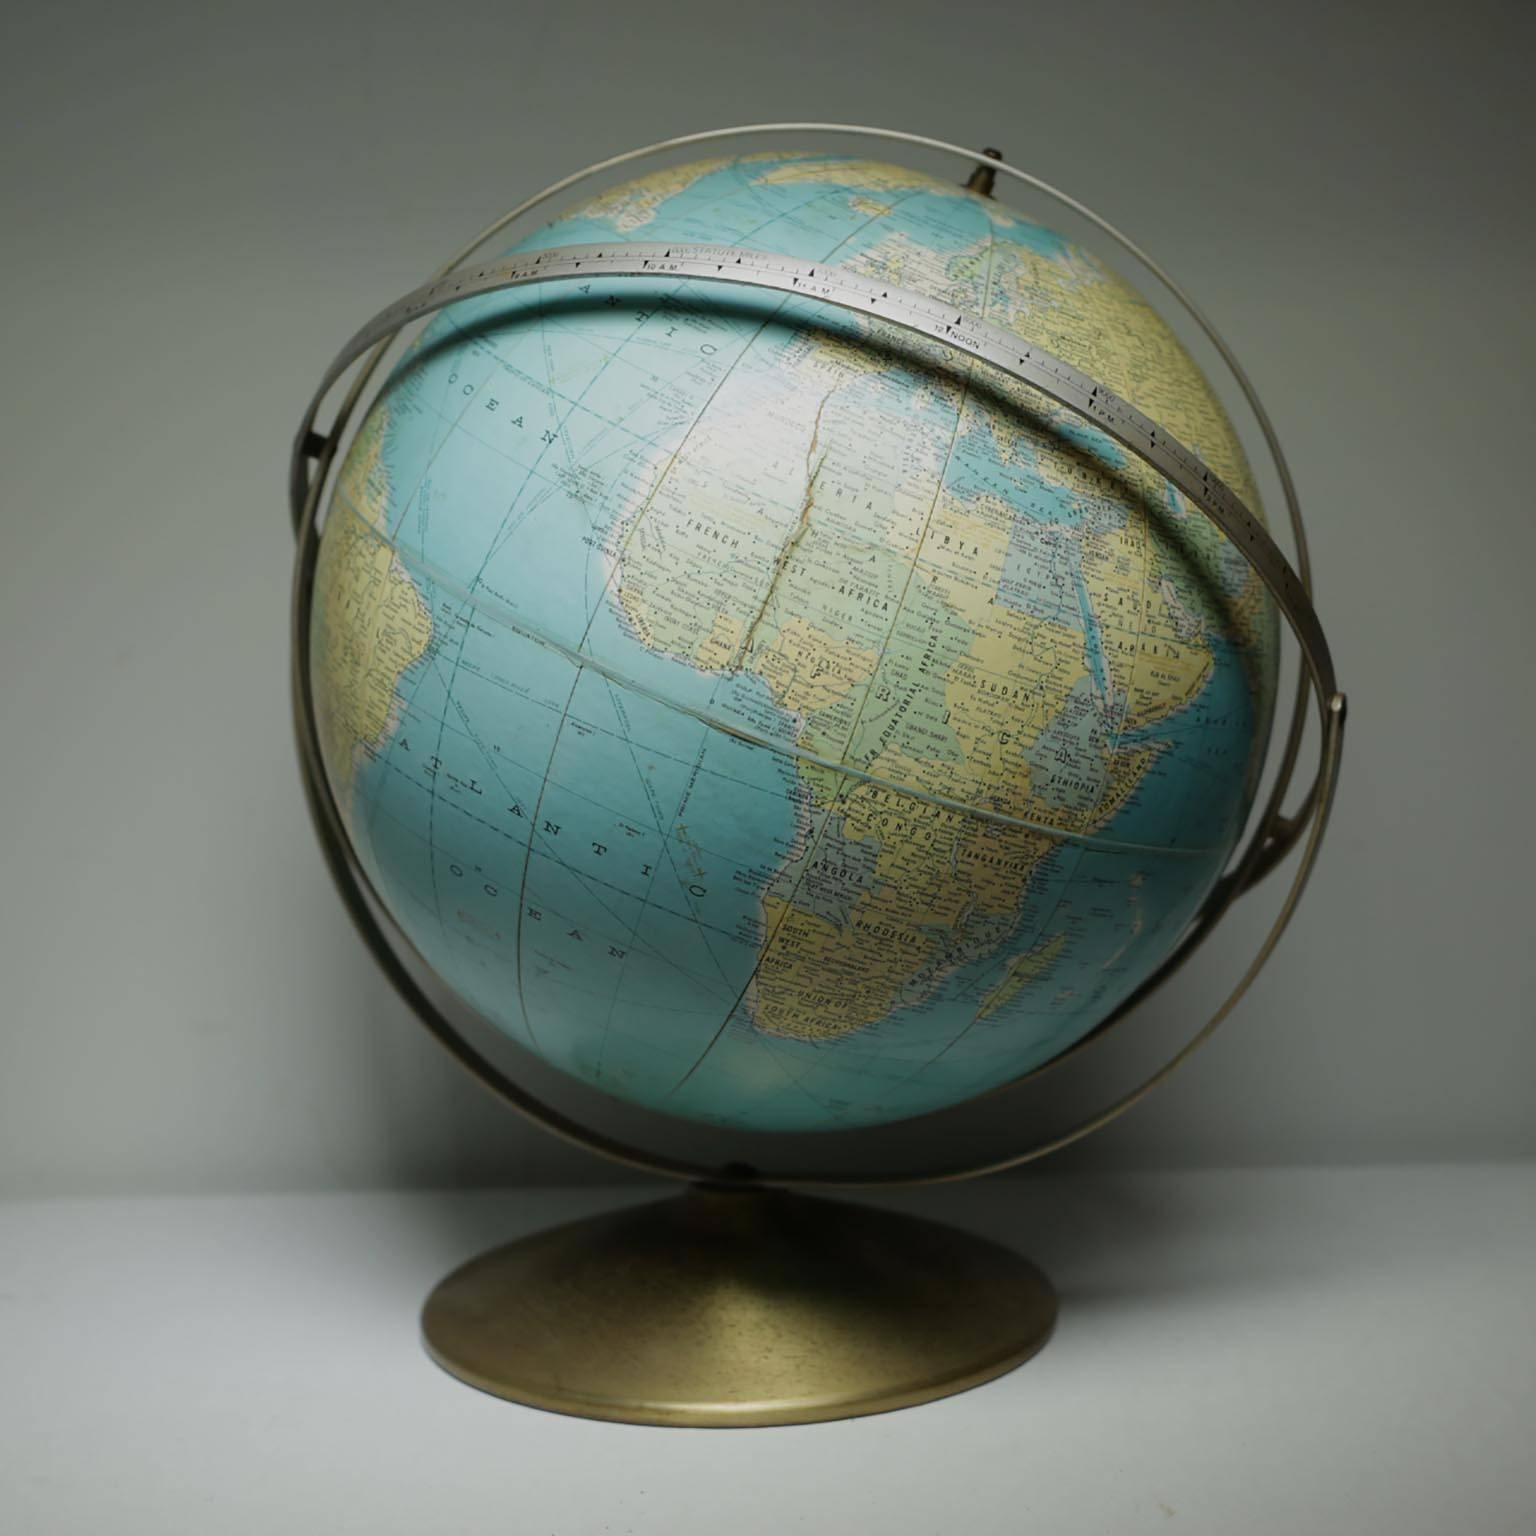 Very unusual world globe with several brackets. One bracket has the time zones and the other has the Longitude.